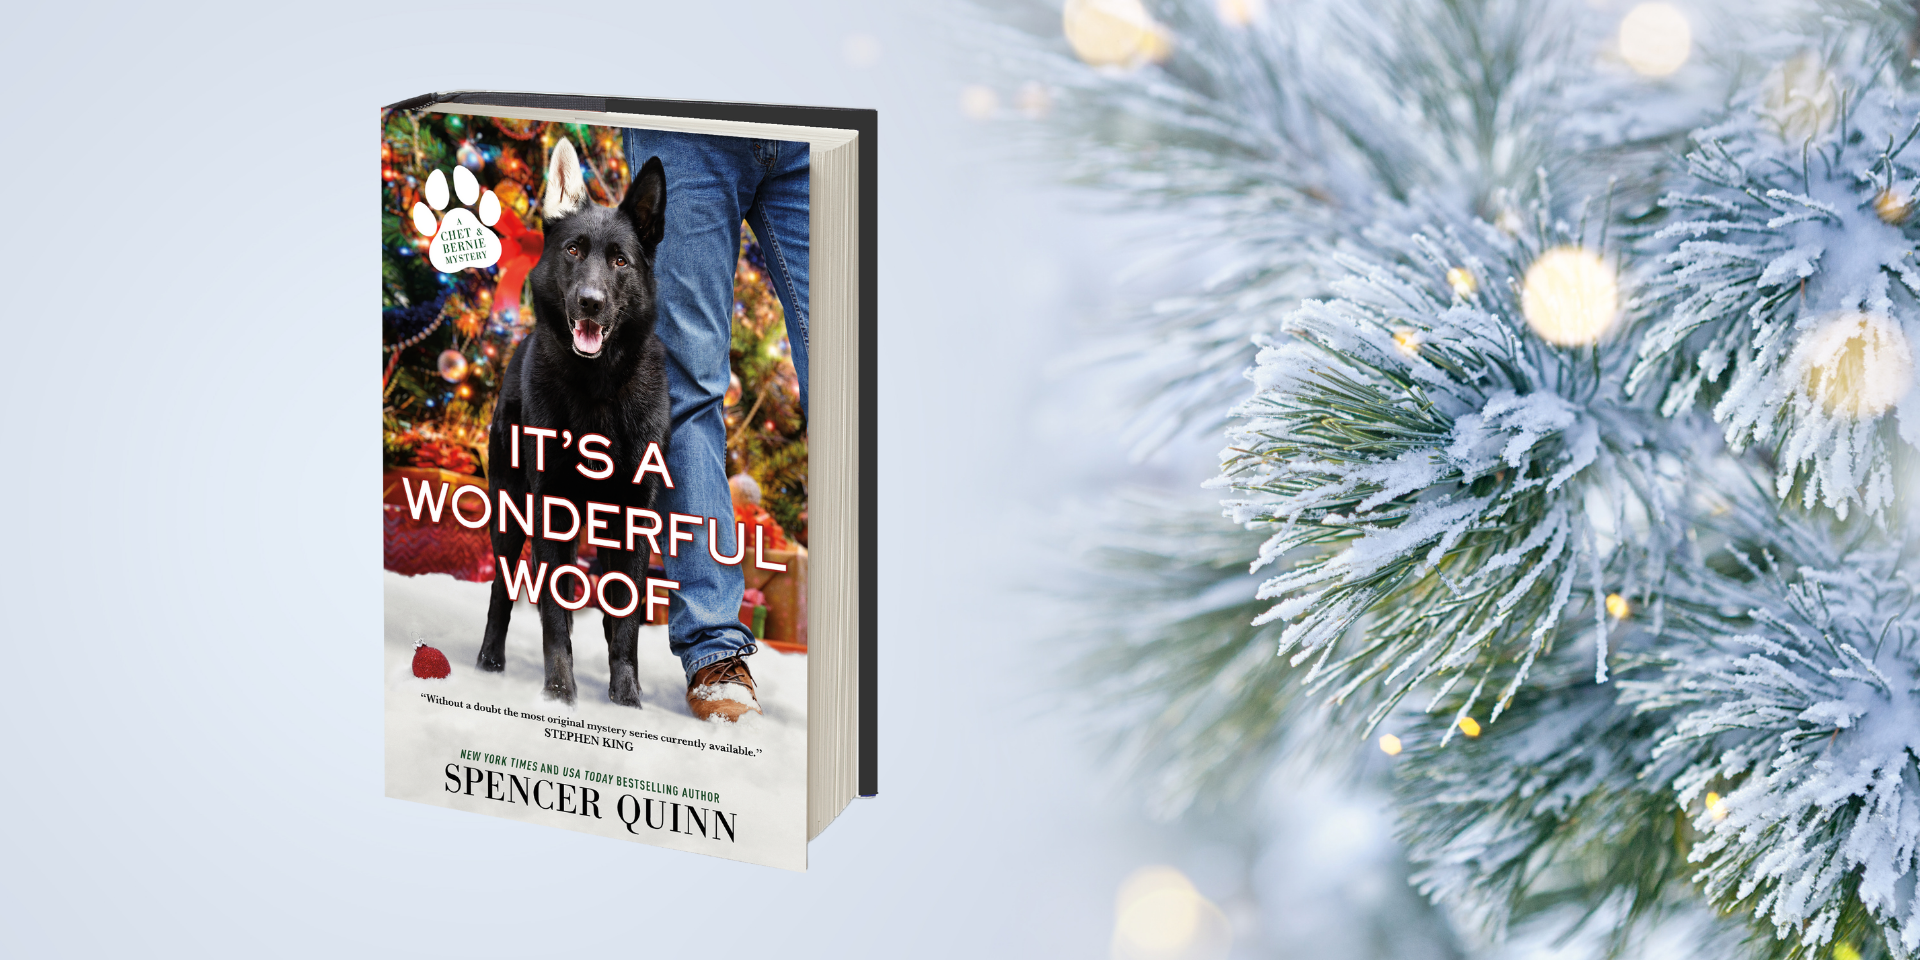 iPhone Case - Dog Lover Gifts - You had me at Woof - Christmas